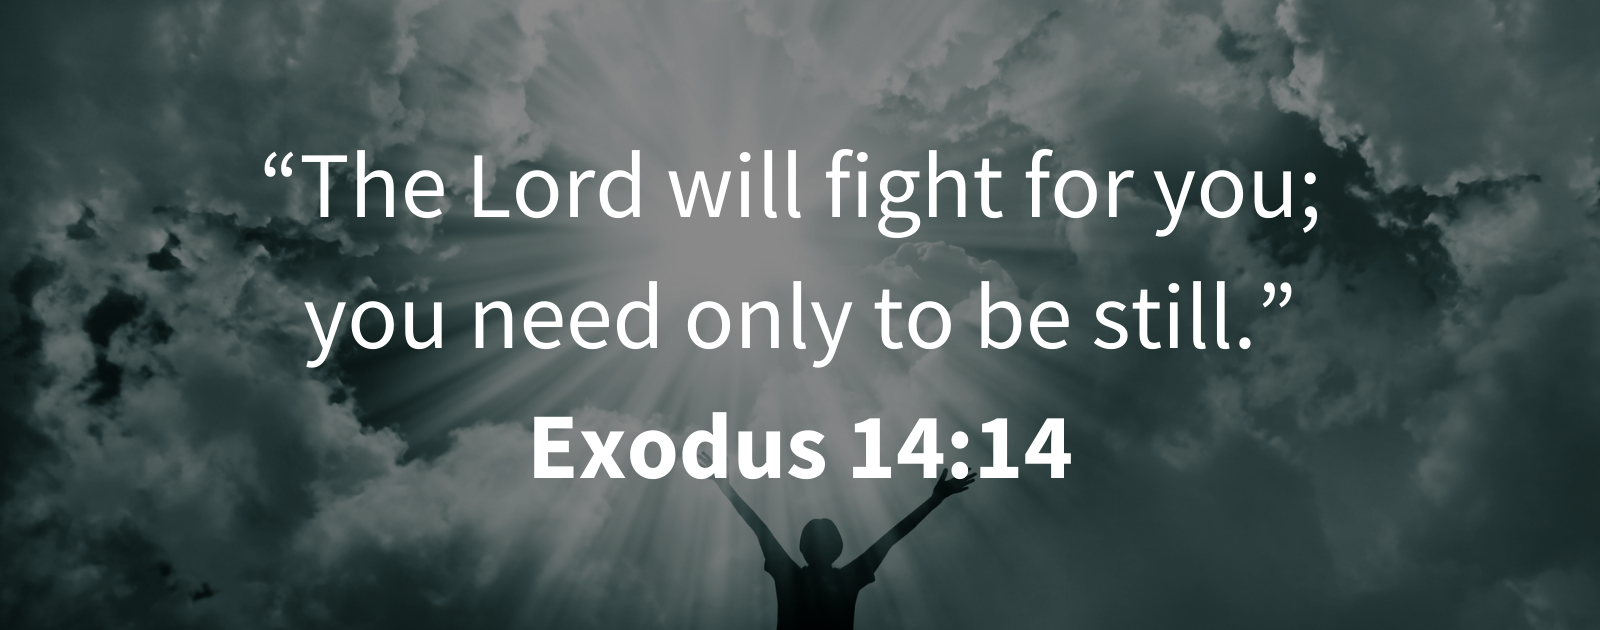 Exodus 1414 The LORD shall fight for you and you shall hold your peace